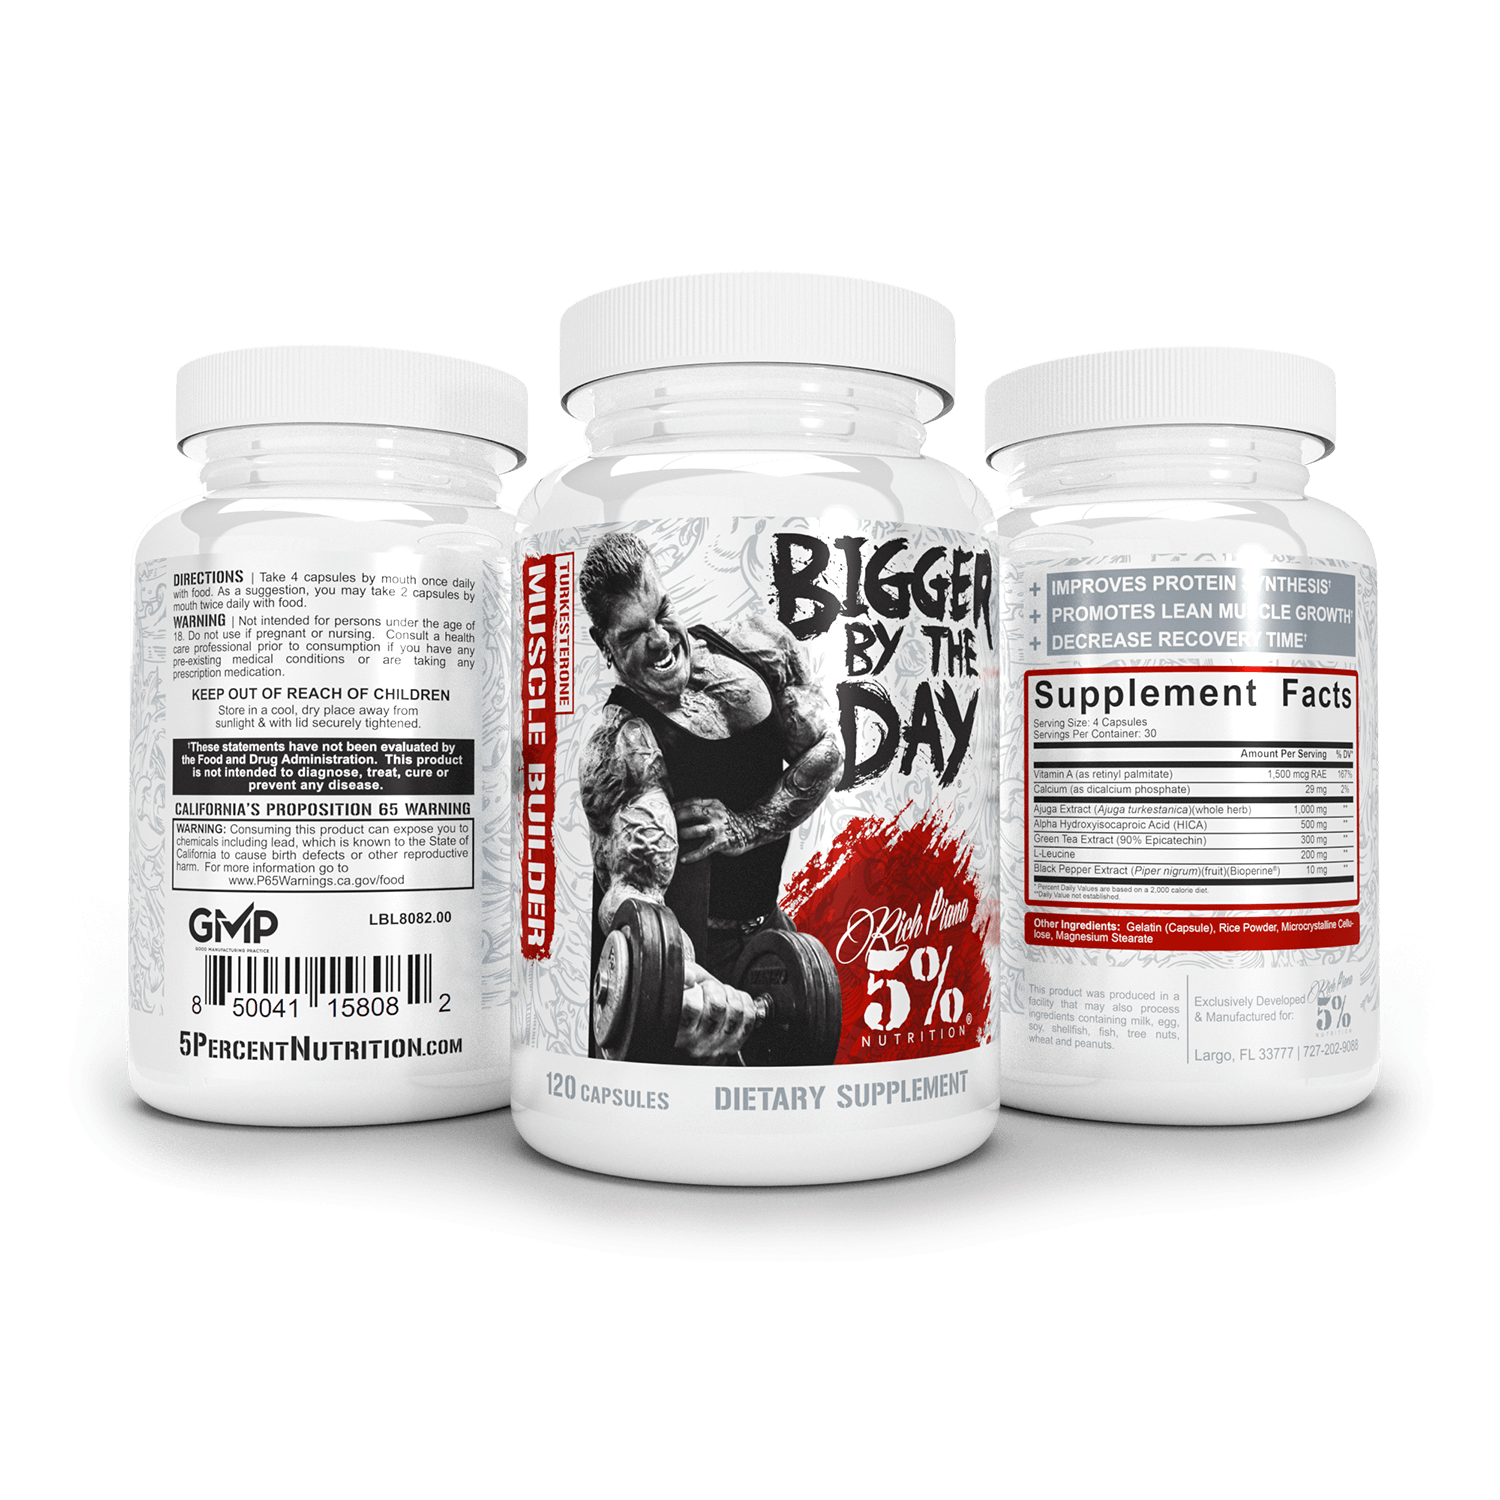 5% Nutrition - BIGGER BY THE DAY - 120 Capsules